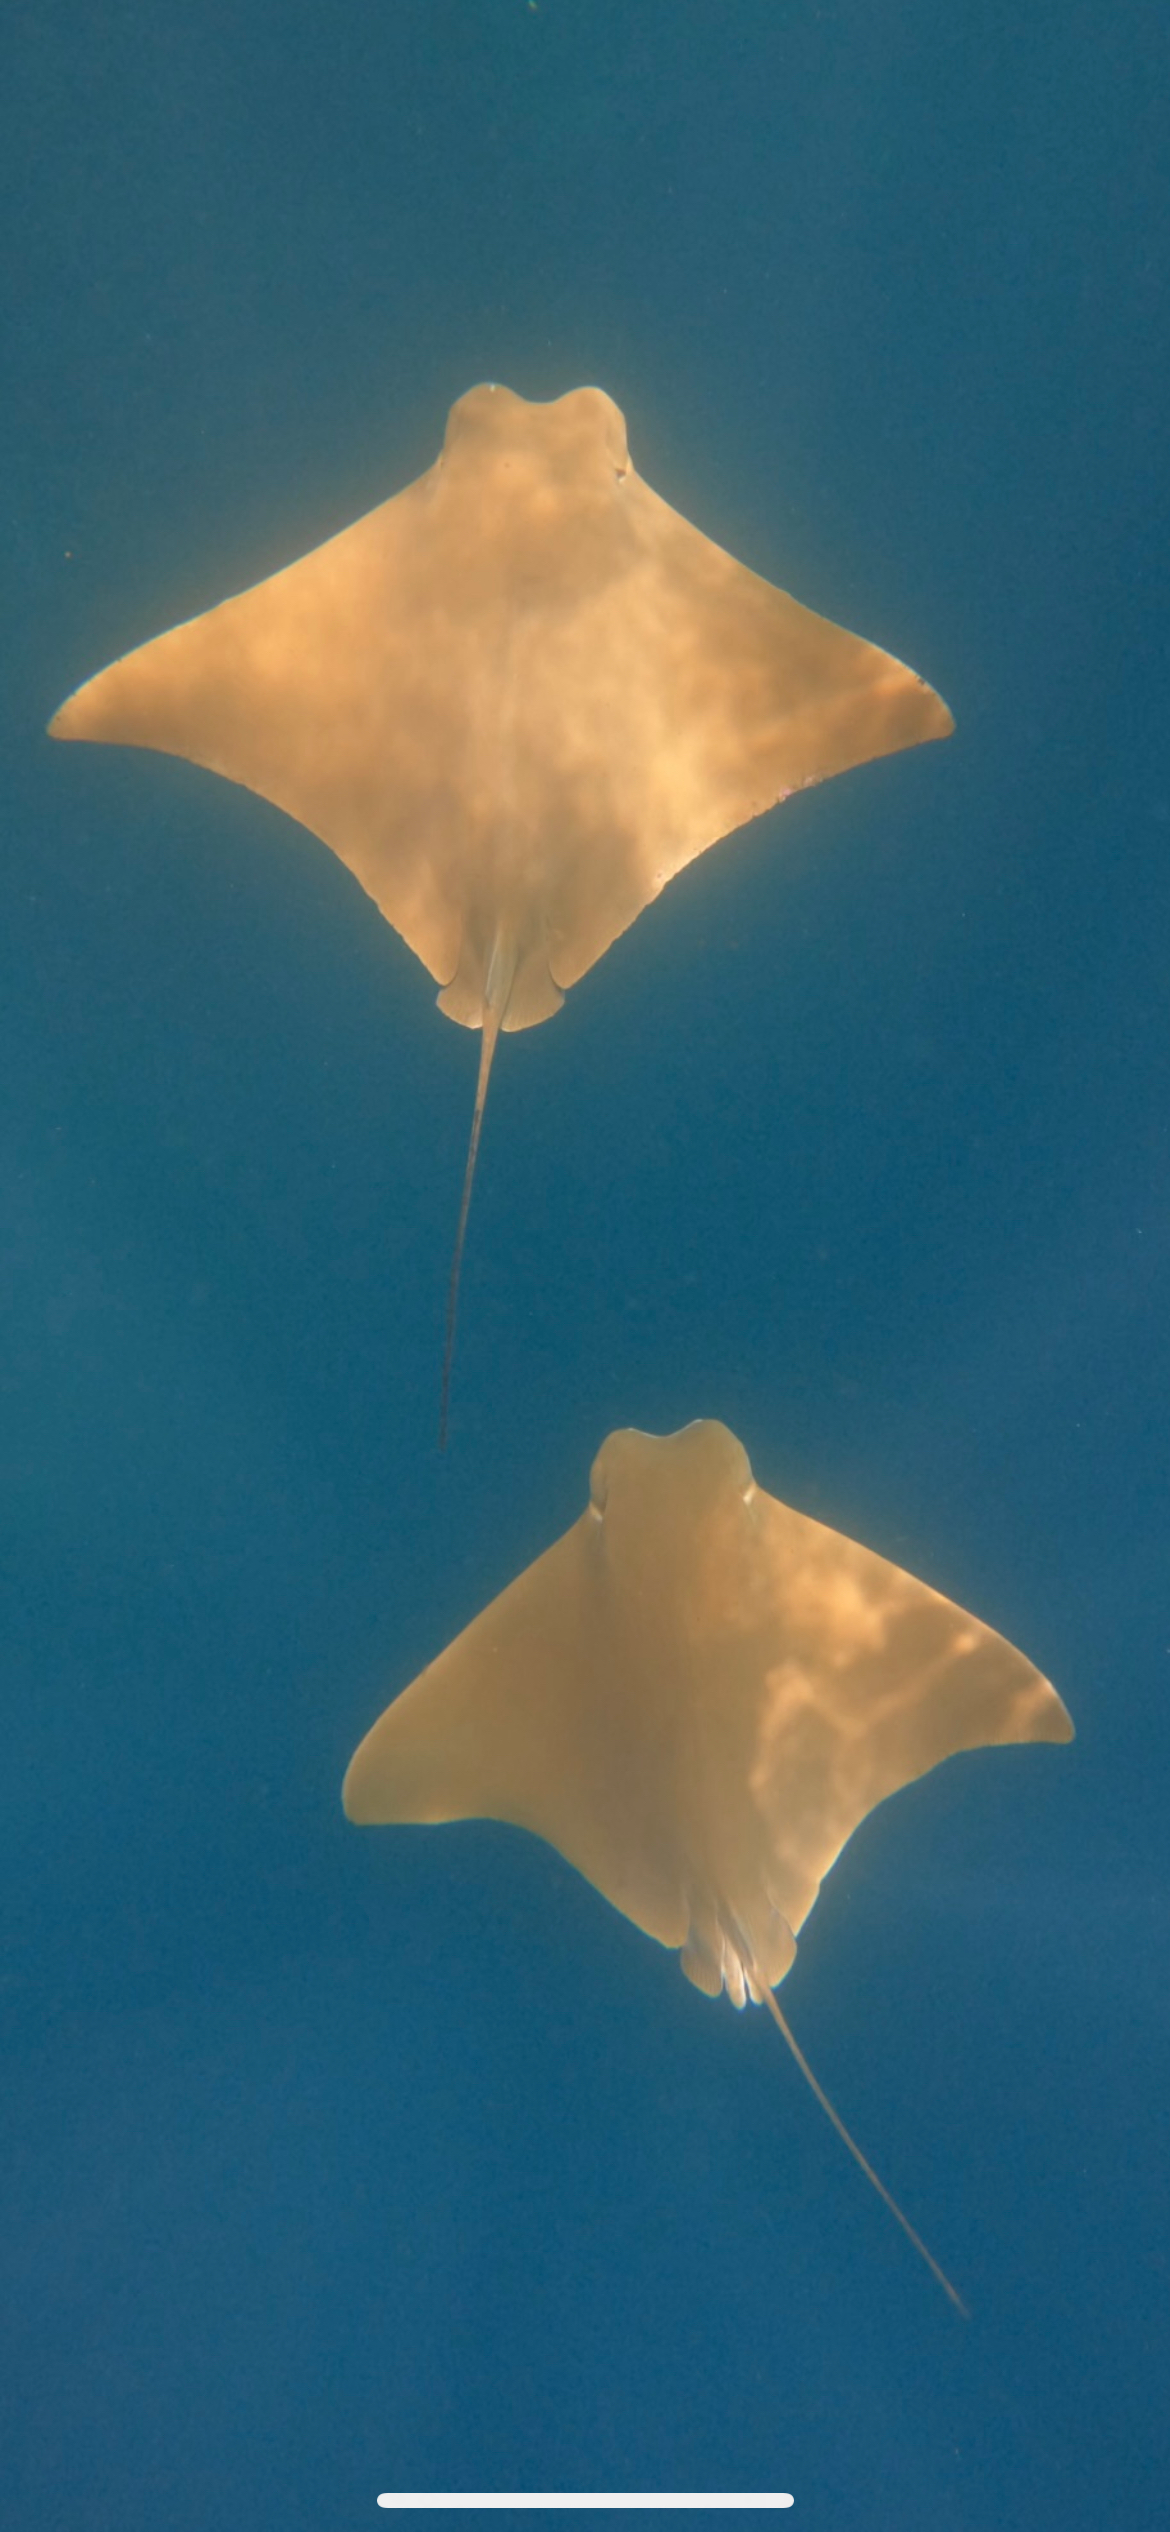 Two Golden Cownose Rays spotted at Kicker Rock while Snorkeling.